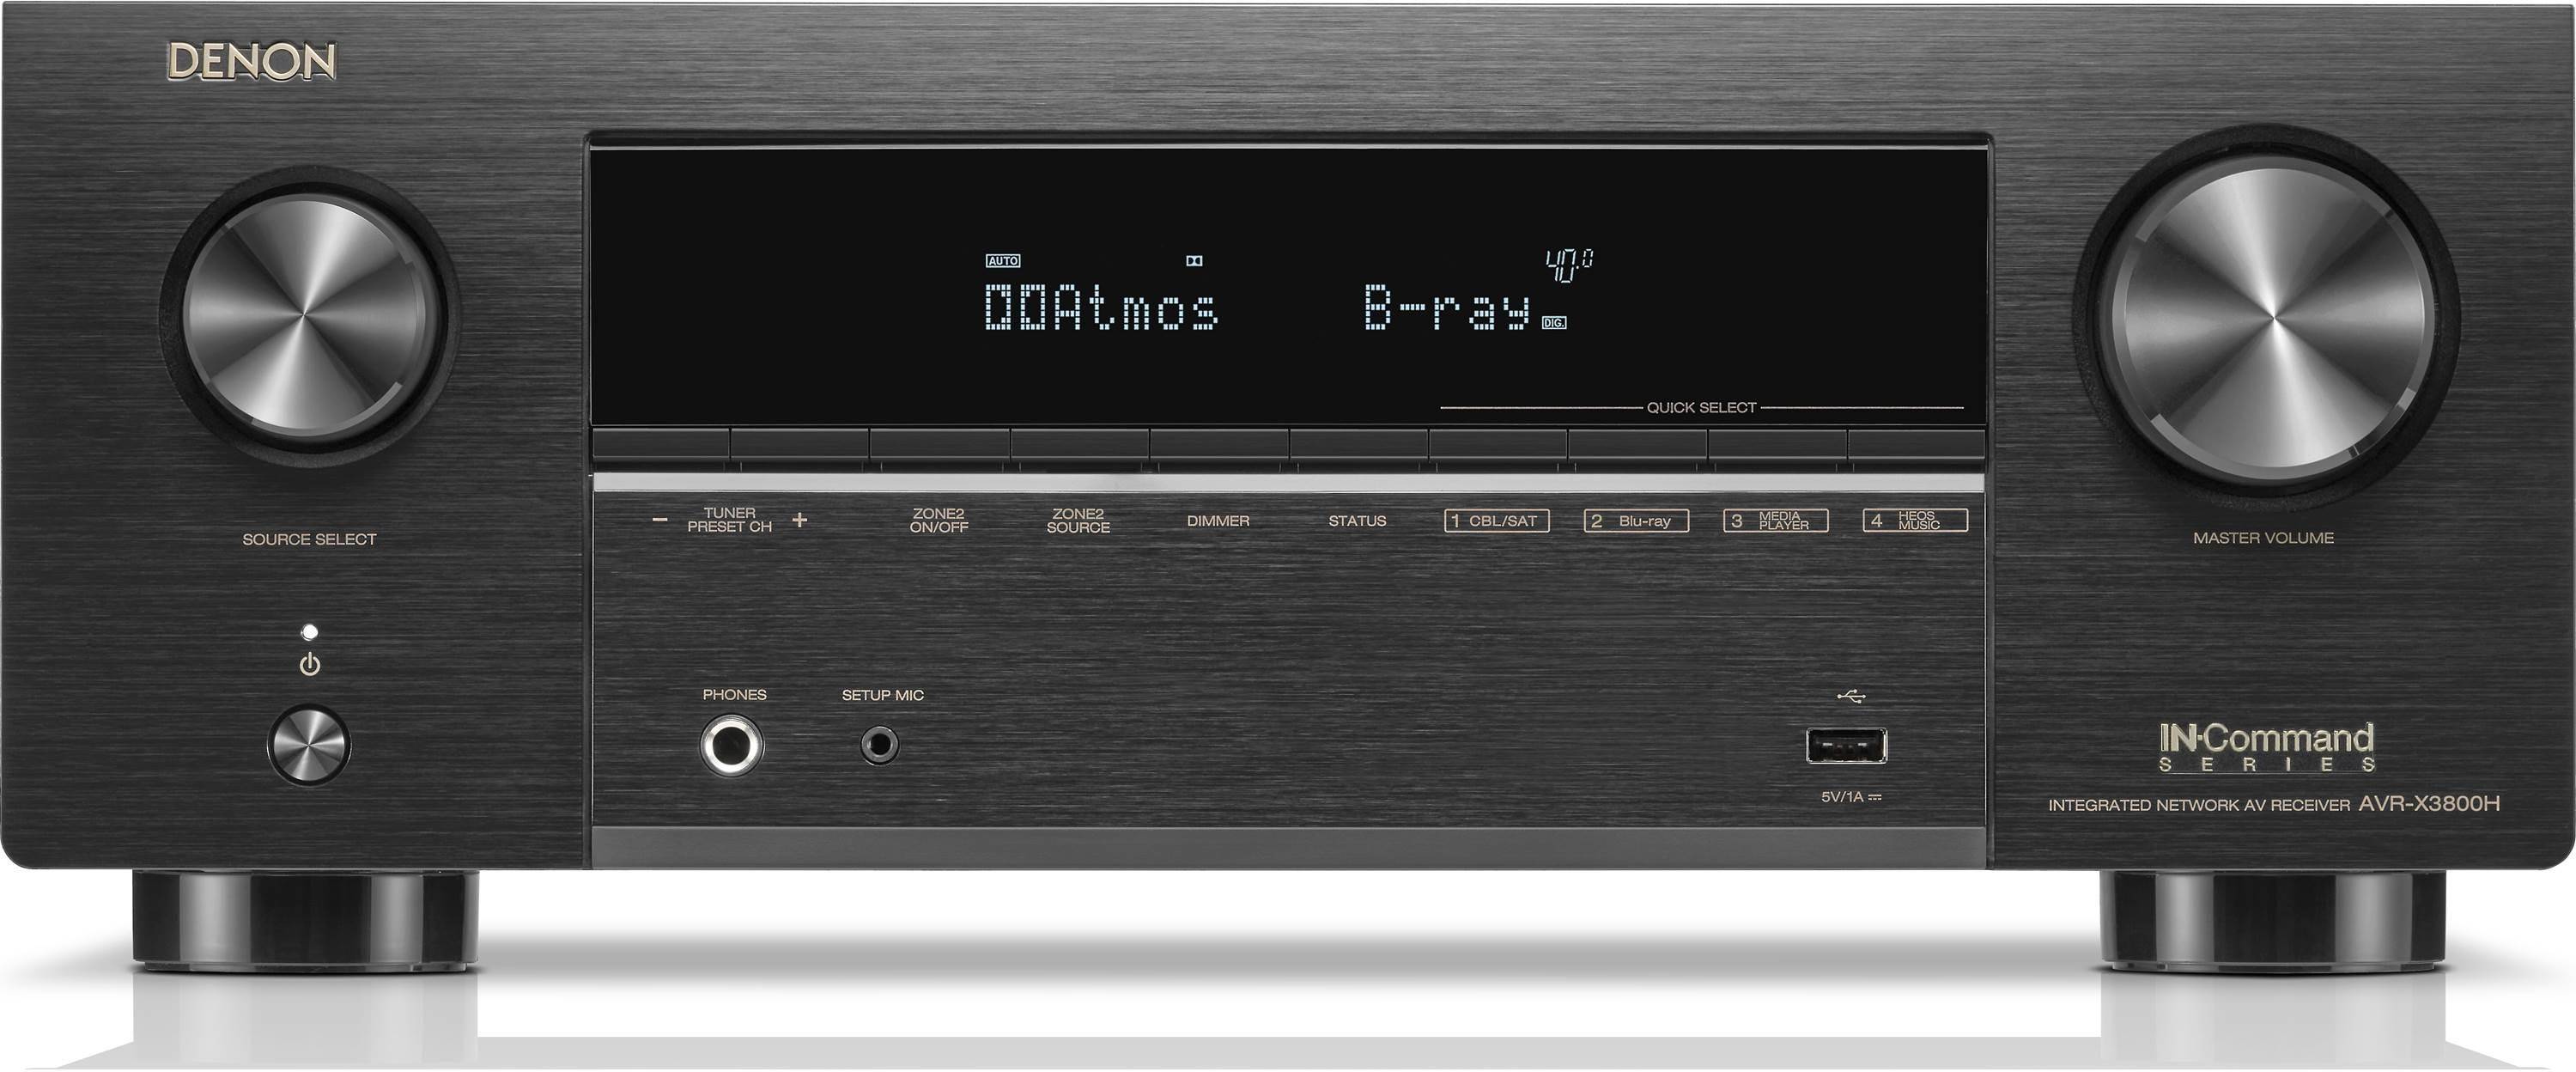 Denon AVR-X3800H 9.4-channel Home Theater Receiver with Dolby Atmos zoom image